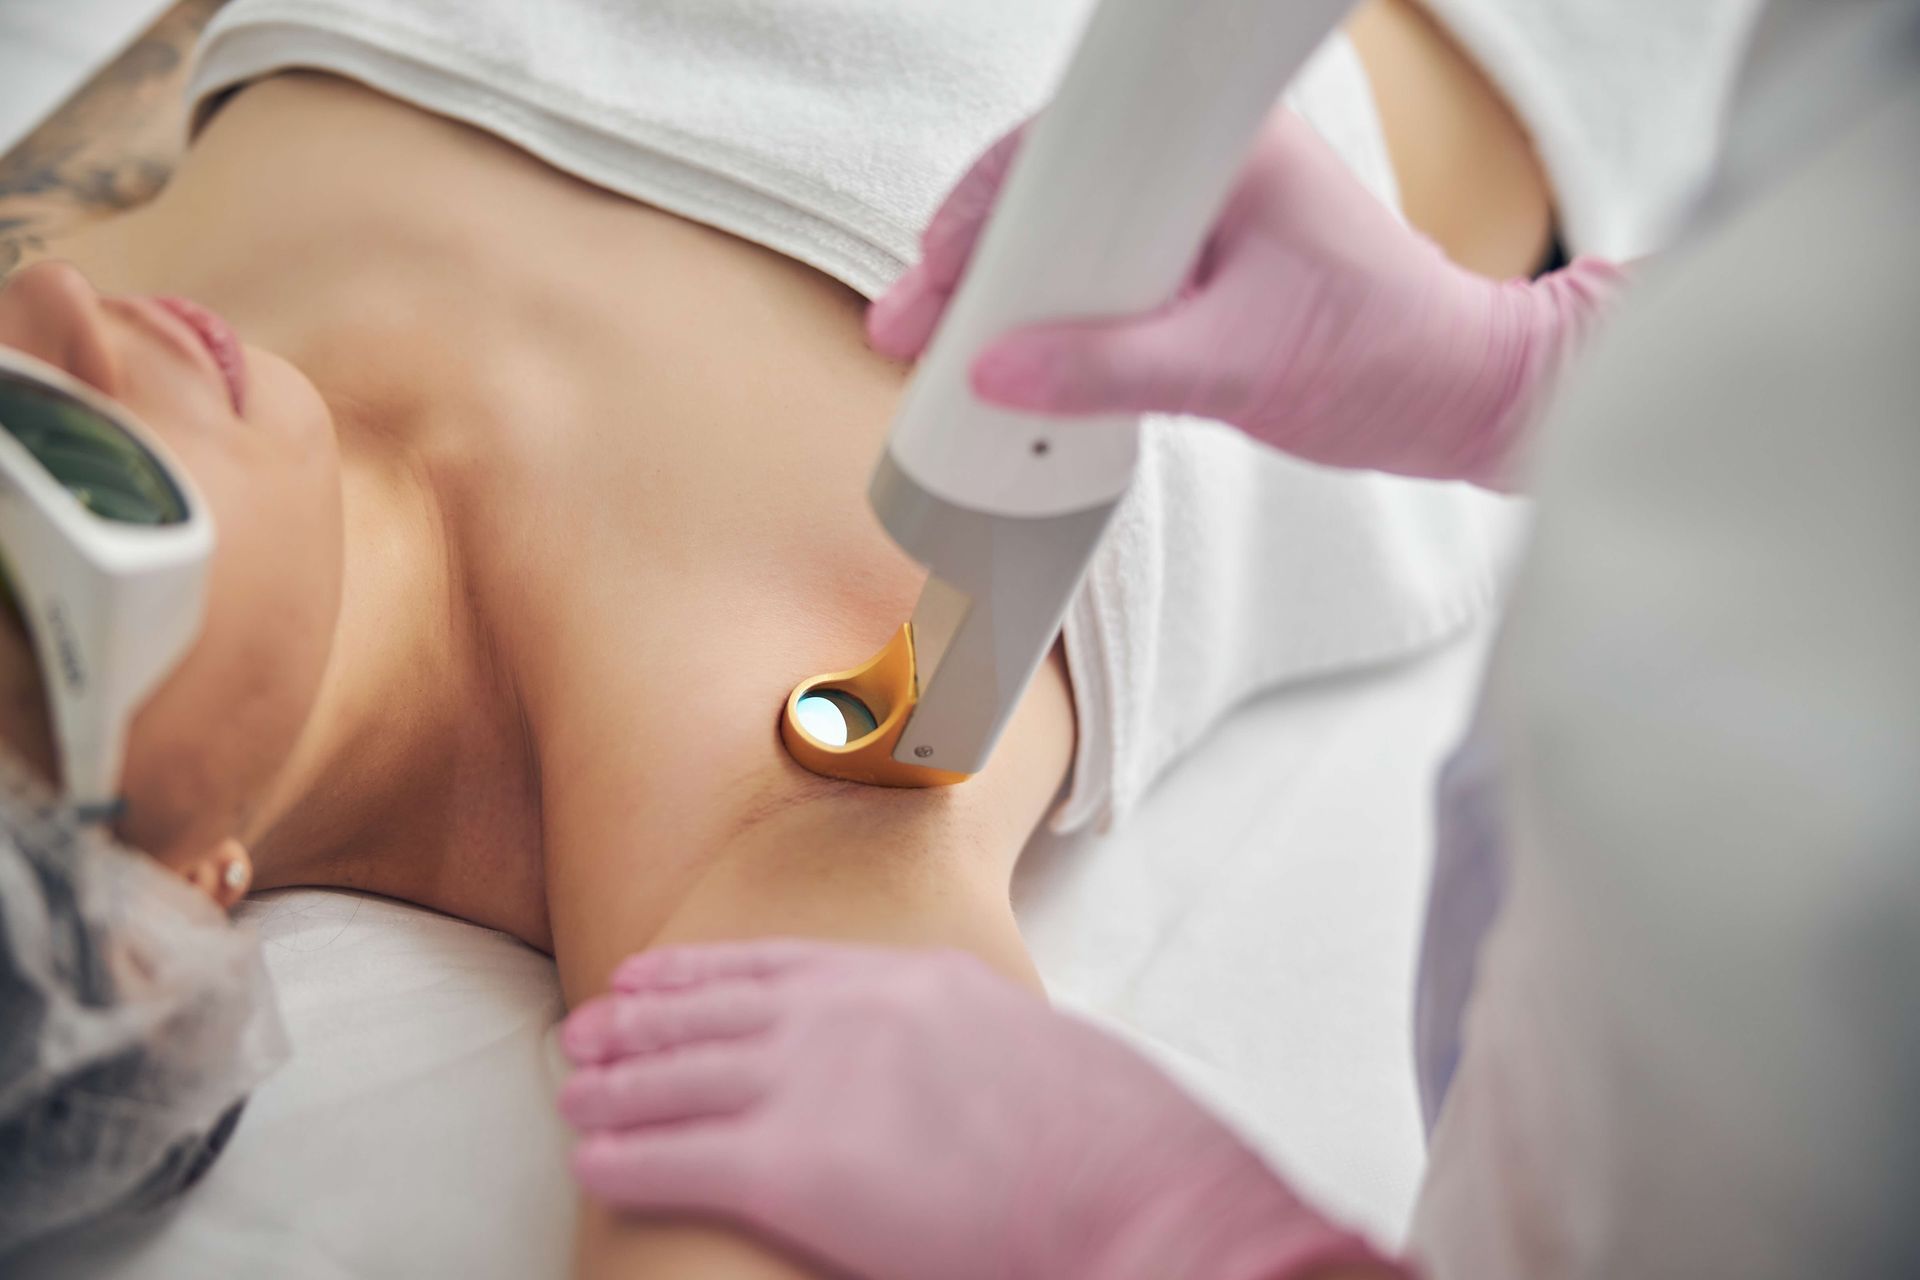 A woman is getting a laser hair removal treatment on her armpit.